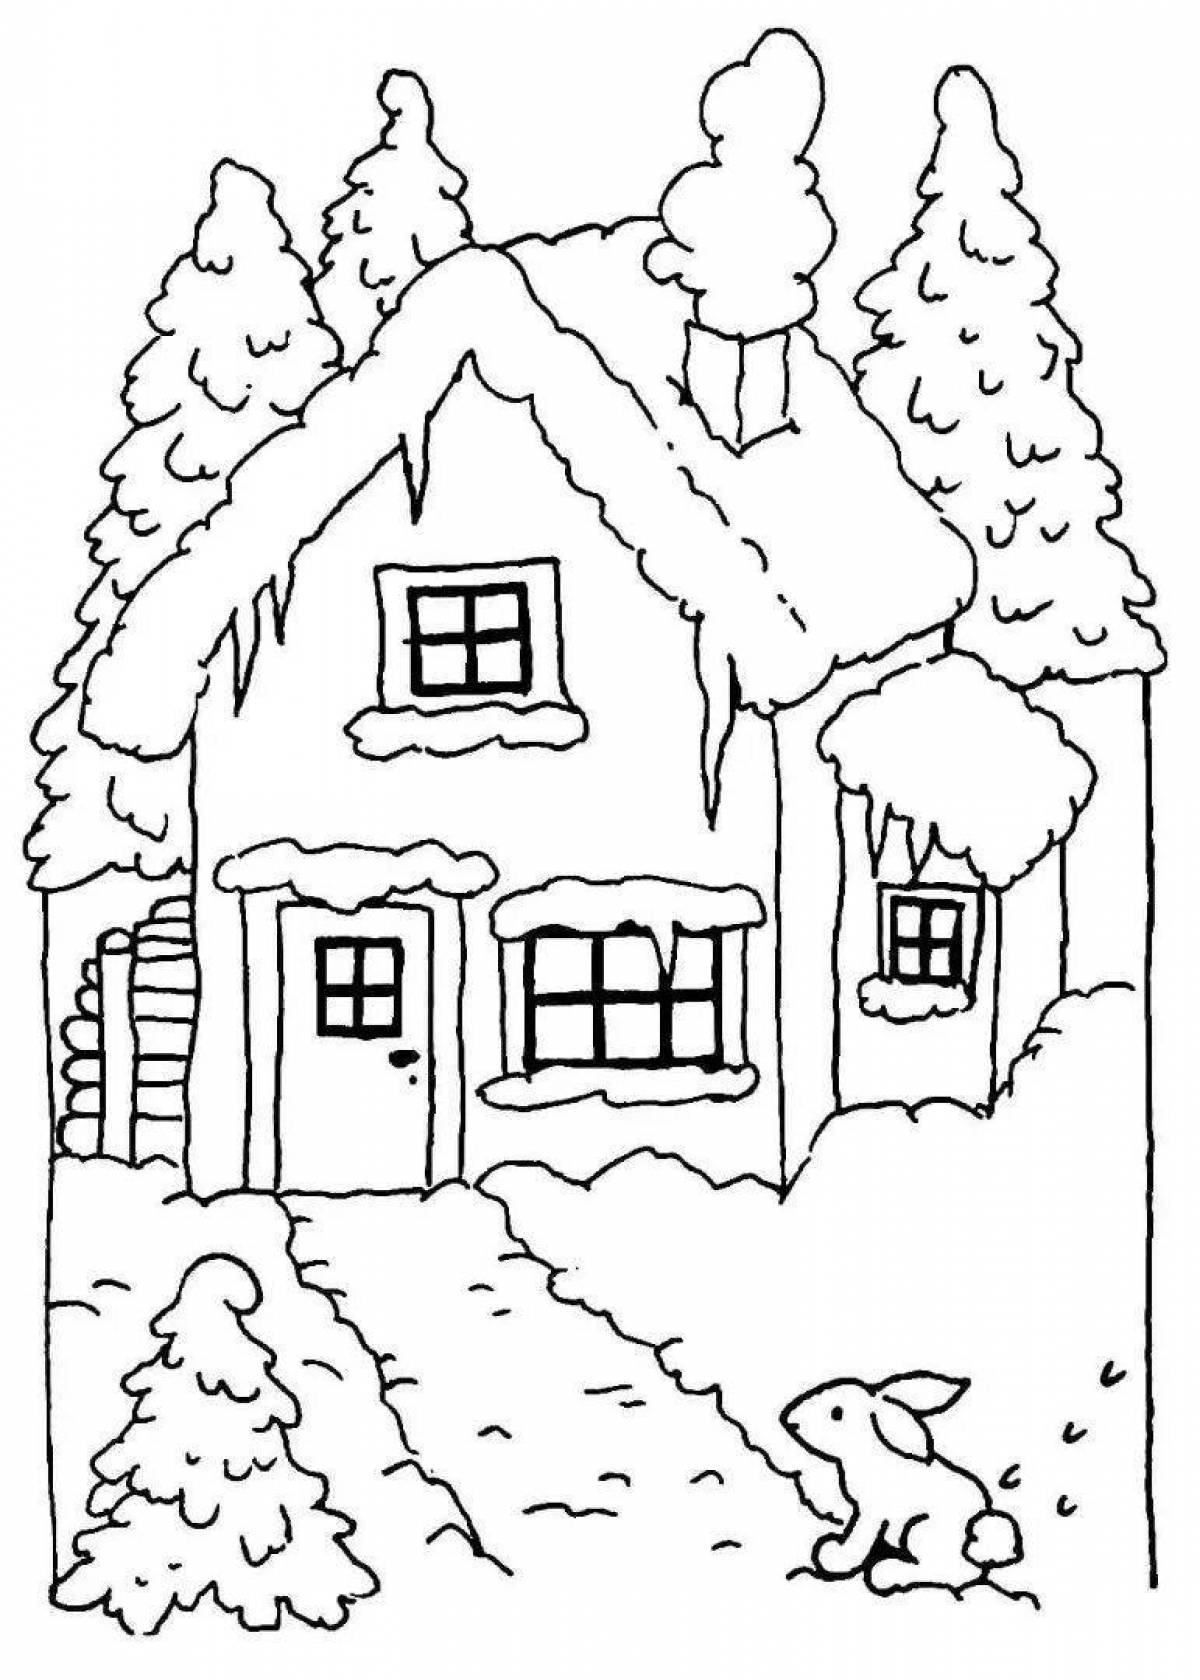 Coloring page blissful winter village